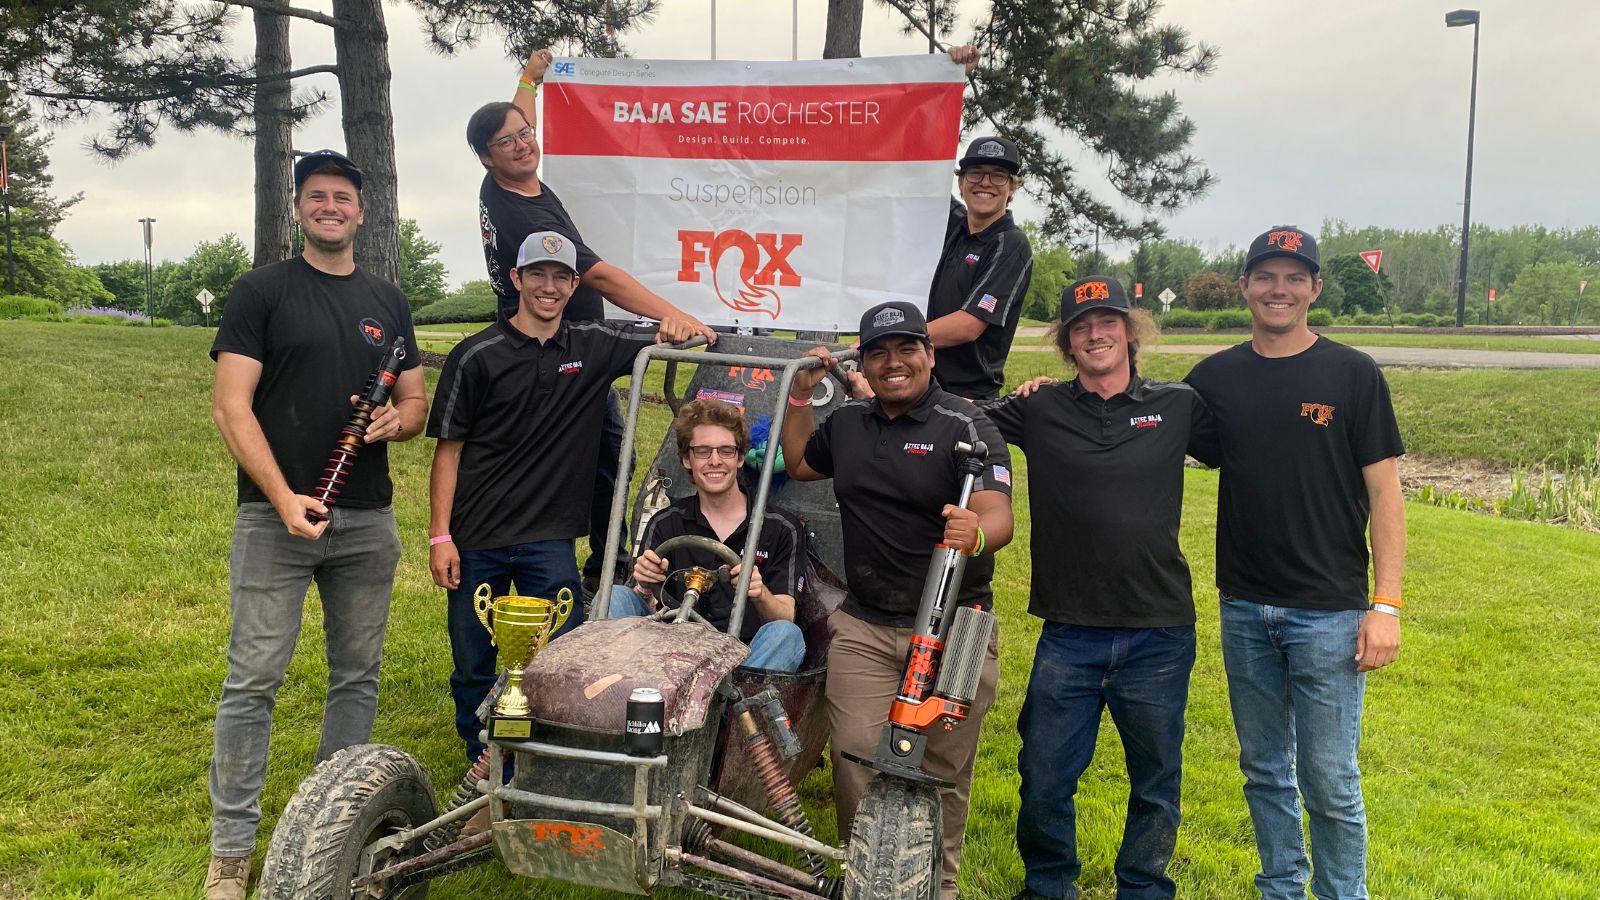 Aztec Baja Places First in Suspension and Traction in Rochester Institute of Technology Race 2022